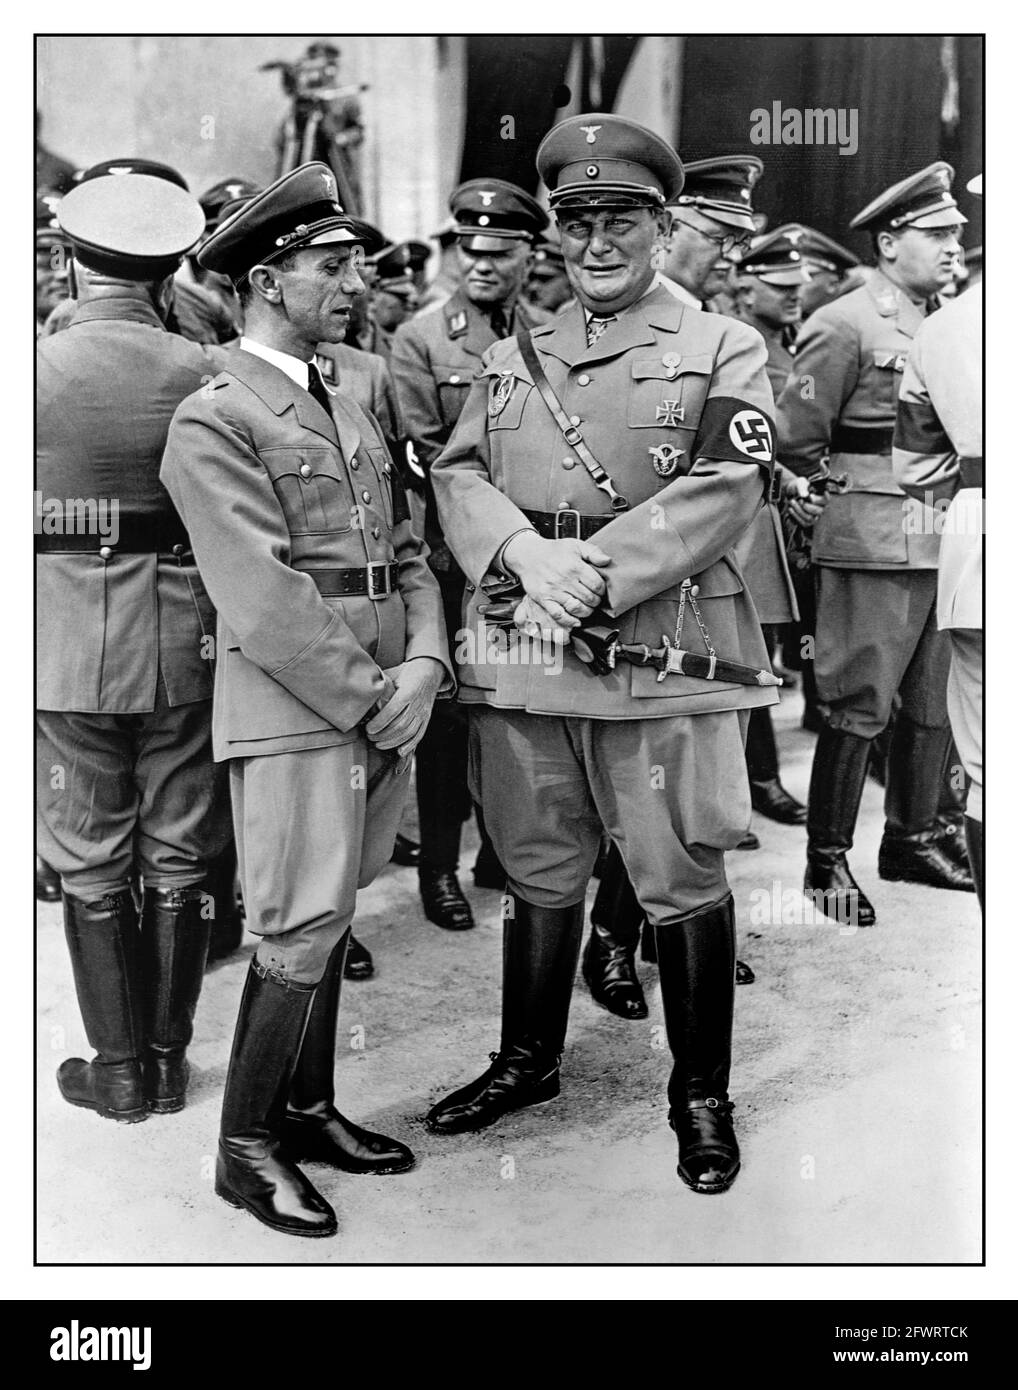 1930s Propaganda Nazi photo of Dr Joseph Goebbels and Hermann Goering in uniform with jackboots wearing Swastika armbands standing together with other high ranking officers of the Nazi Party. Germany, 1936. Stock Photo